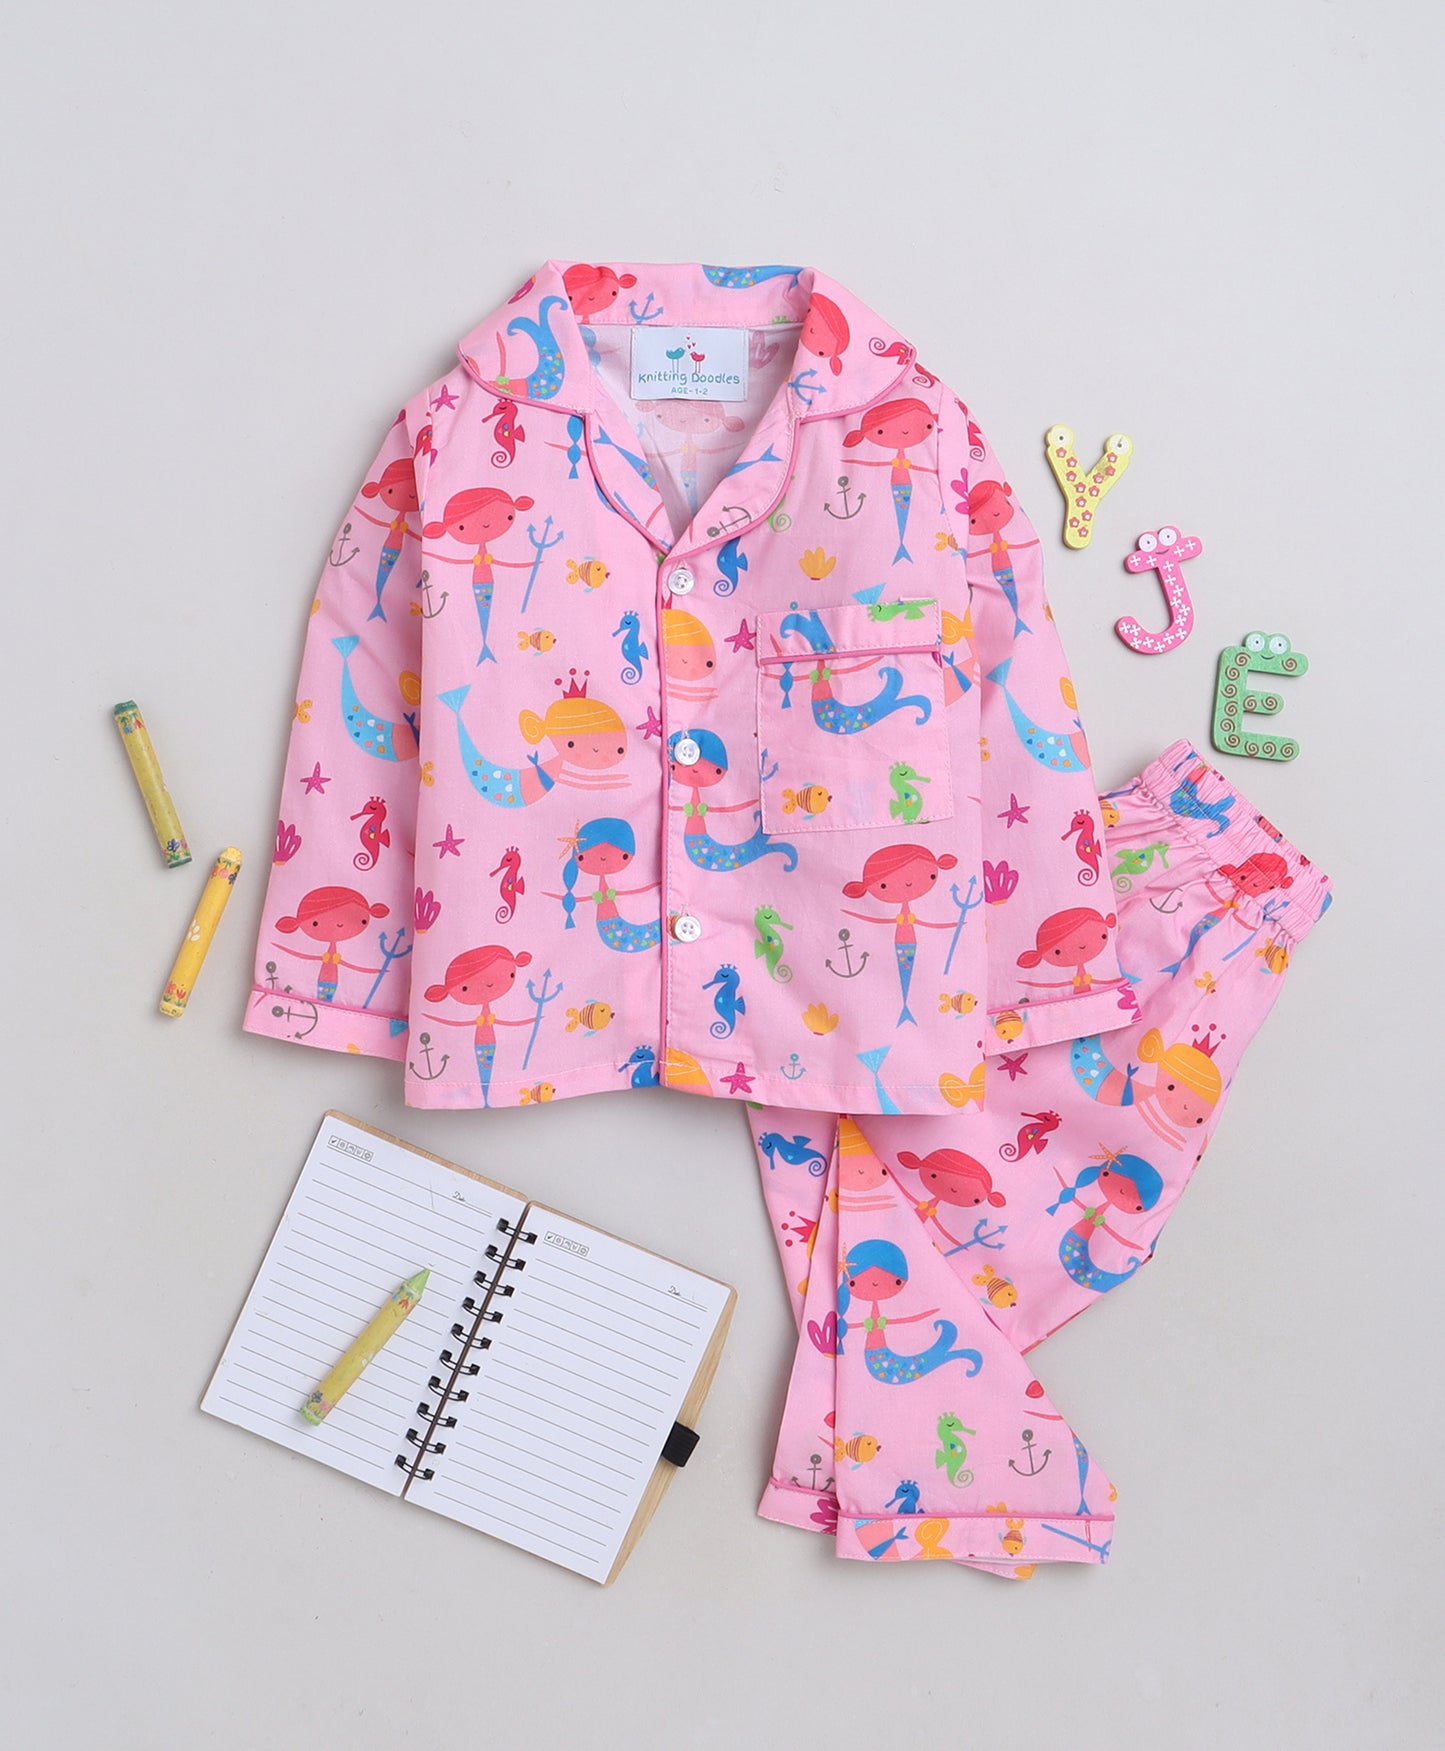 Knitting Doodles Premium cotton Kids' Notched Collar Night suit in Cute Mermaid Print- Pink